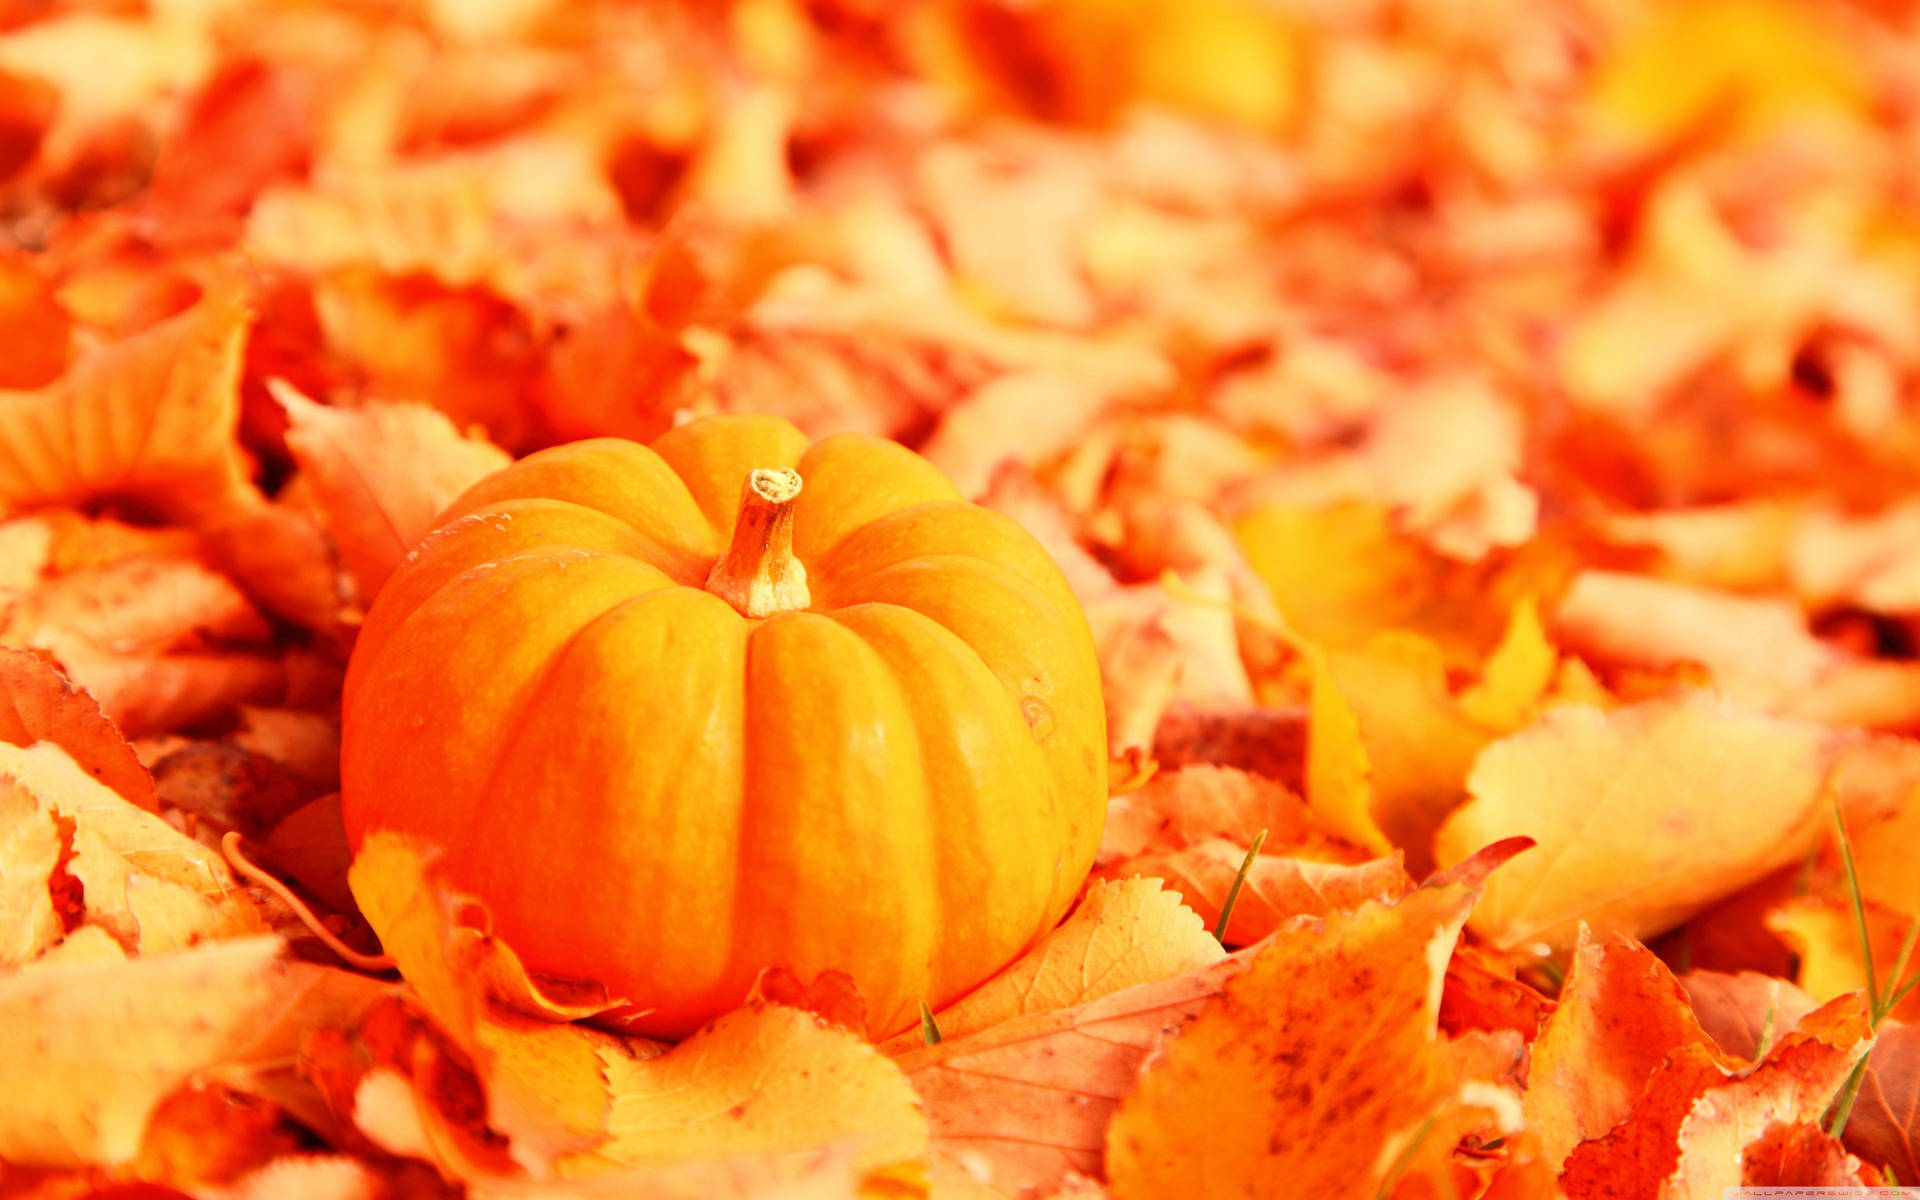 A Bright Orange Pumpkin Smiles In Anticipation Of Fall. Background